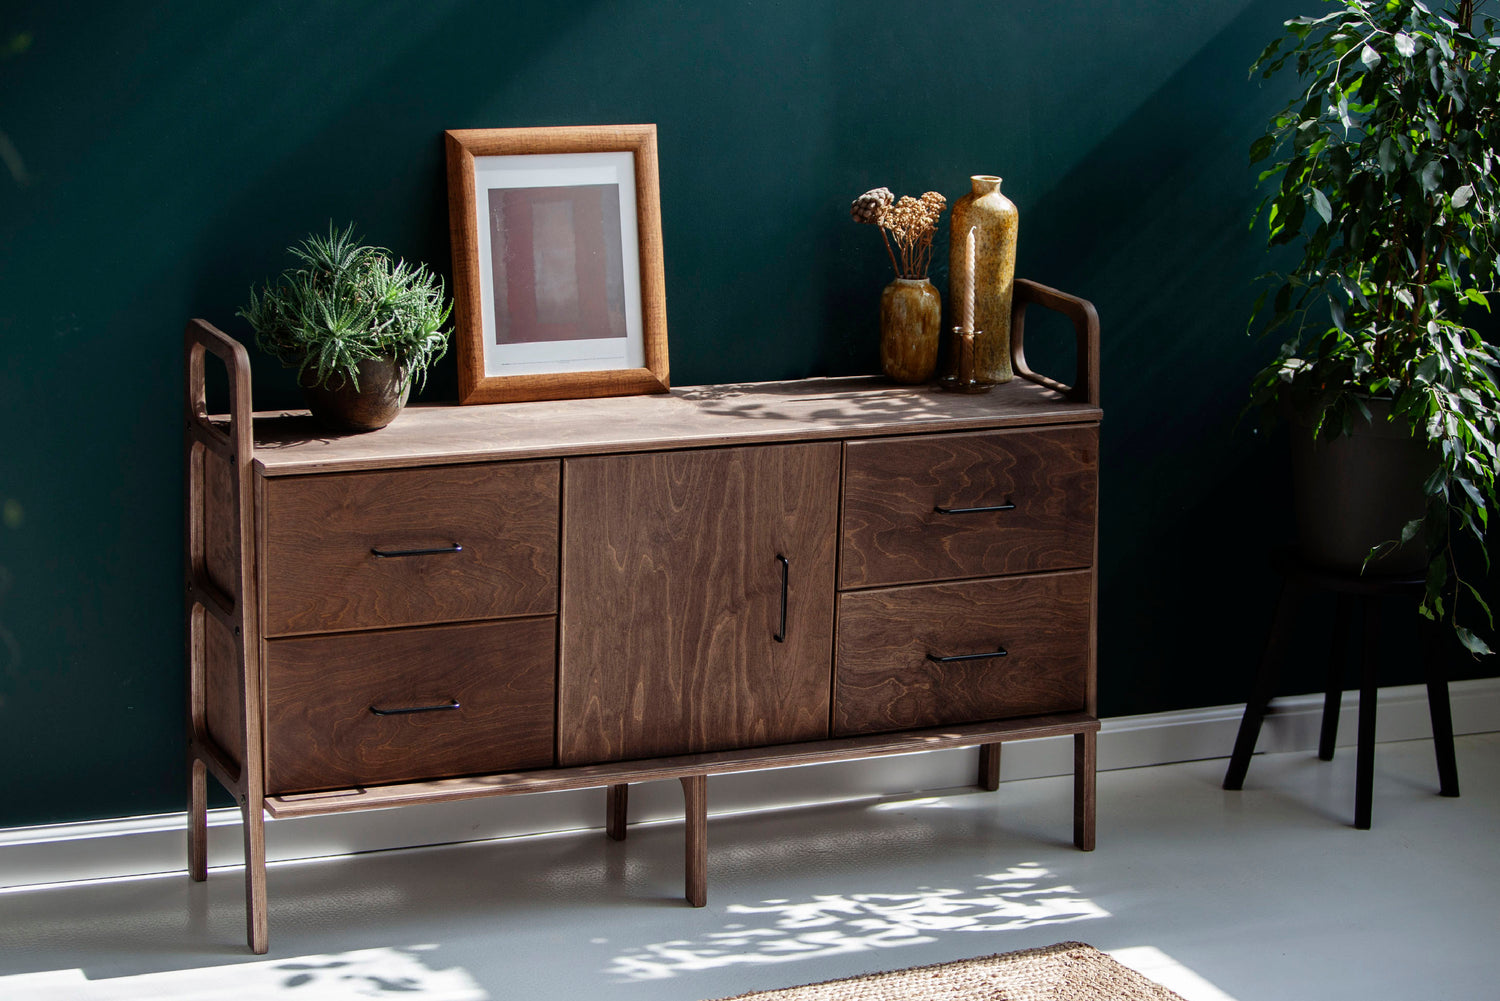 Sideboard with drawers, sideboard with a cabinet or maybe a sideboard made of plywood - which one to choose?